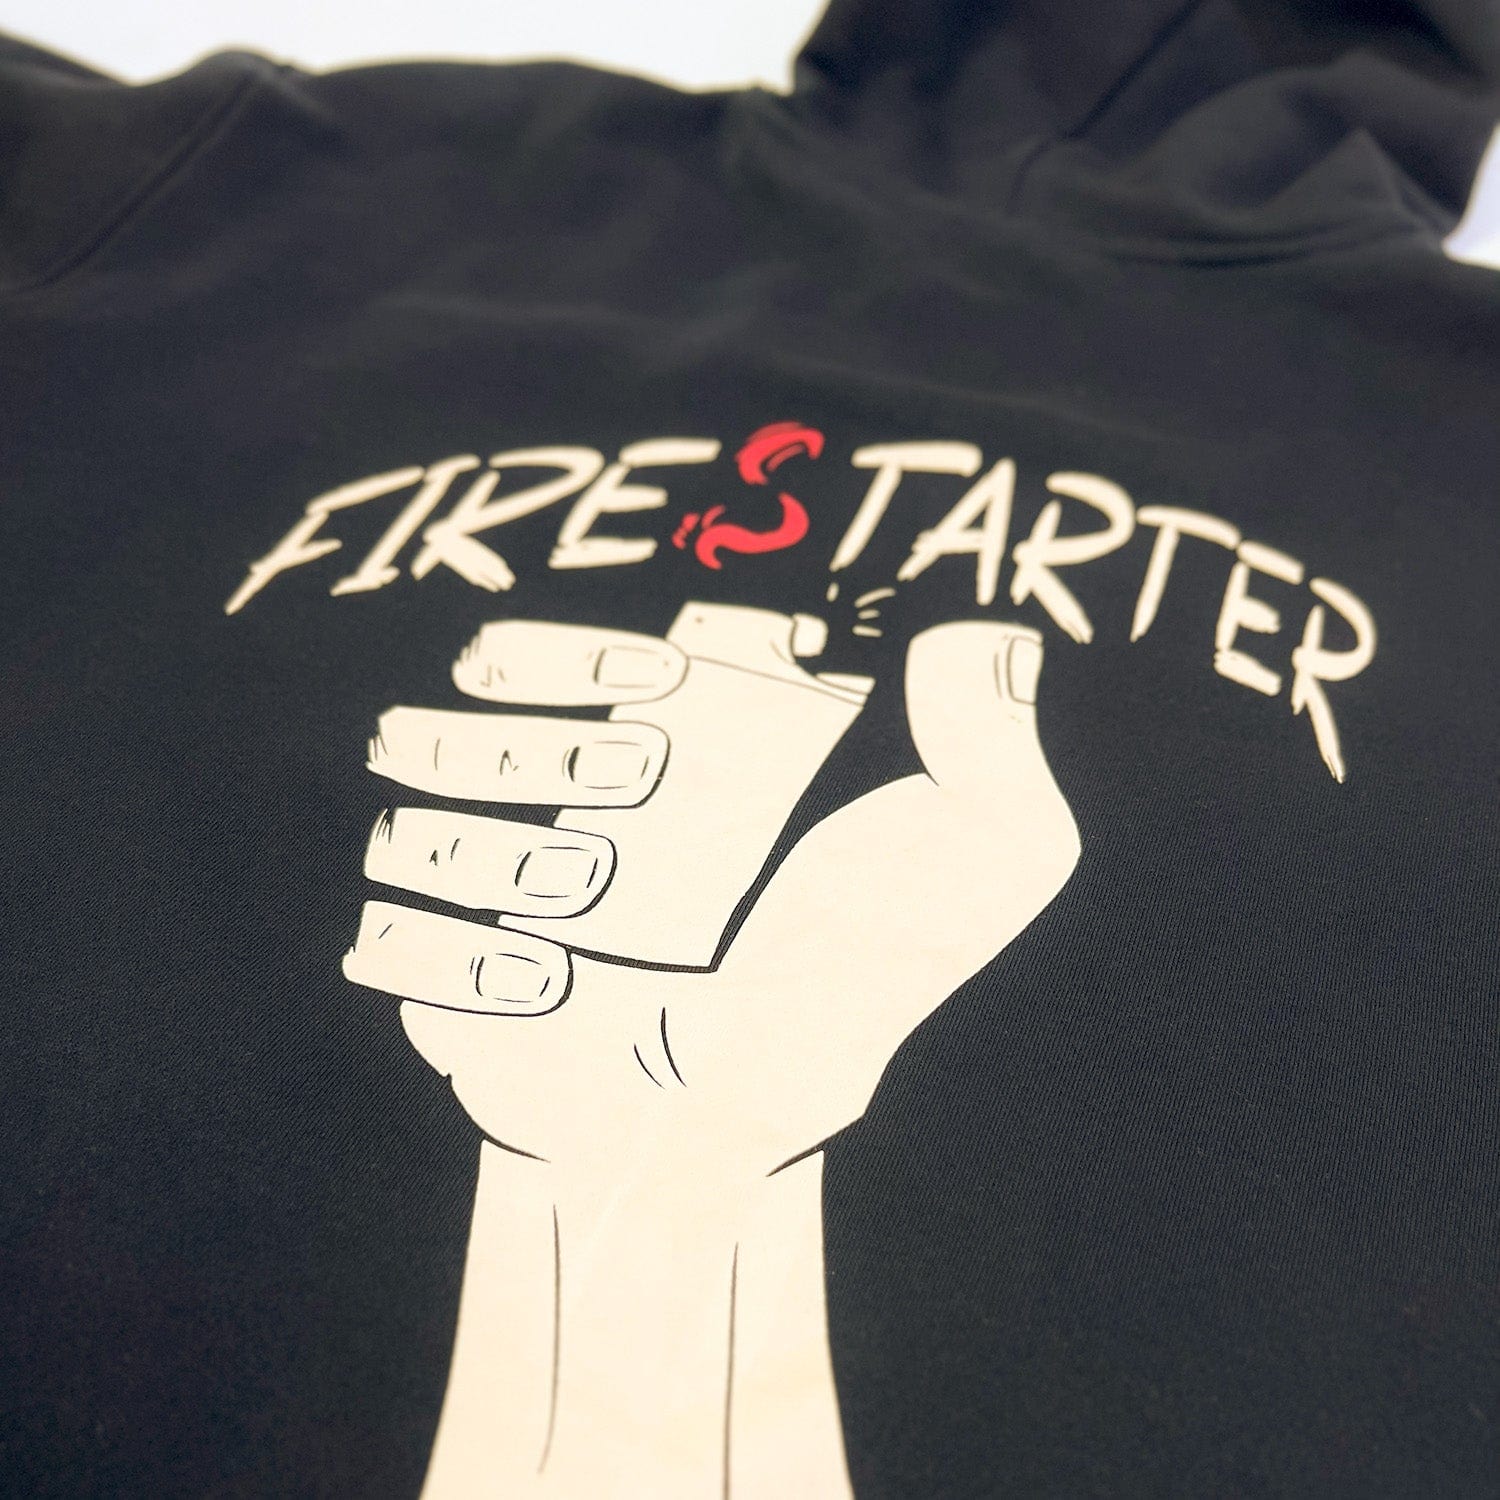 How does the new Firestarter stack up against the original?